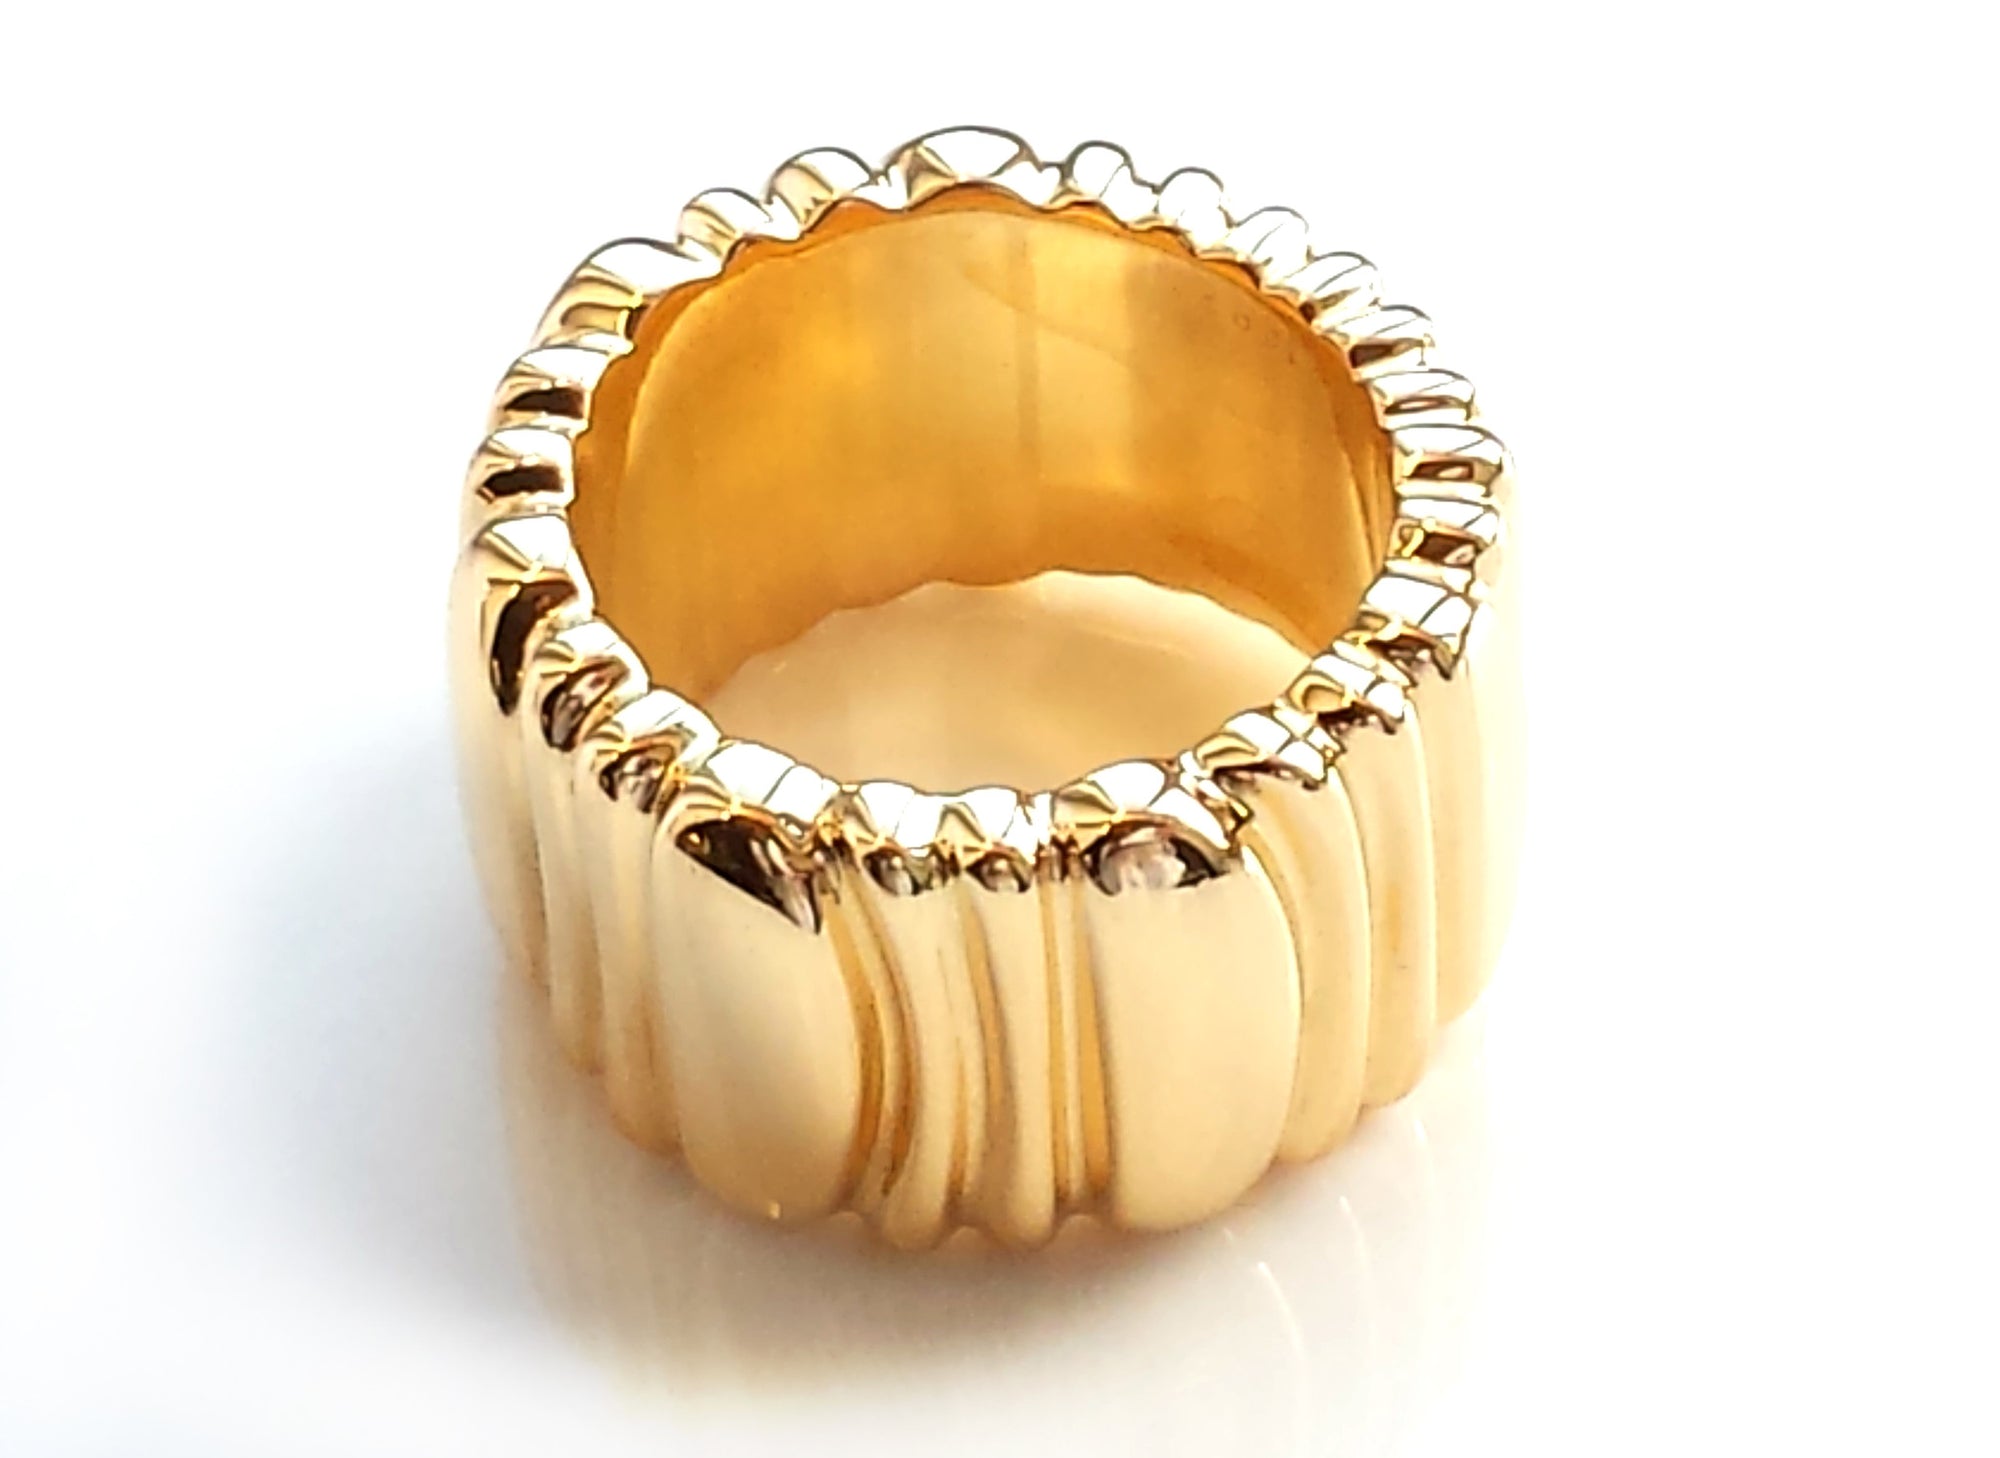 Vintage Cartier 1990s Casque D'or Ring in 18k Yellow Gold, Size 51